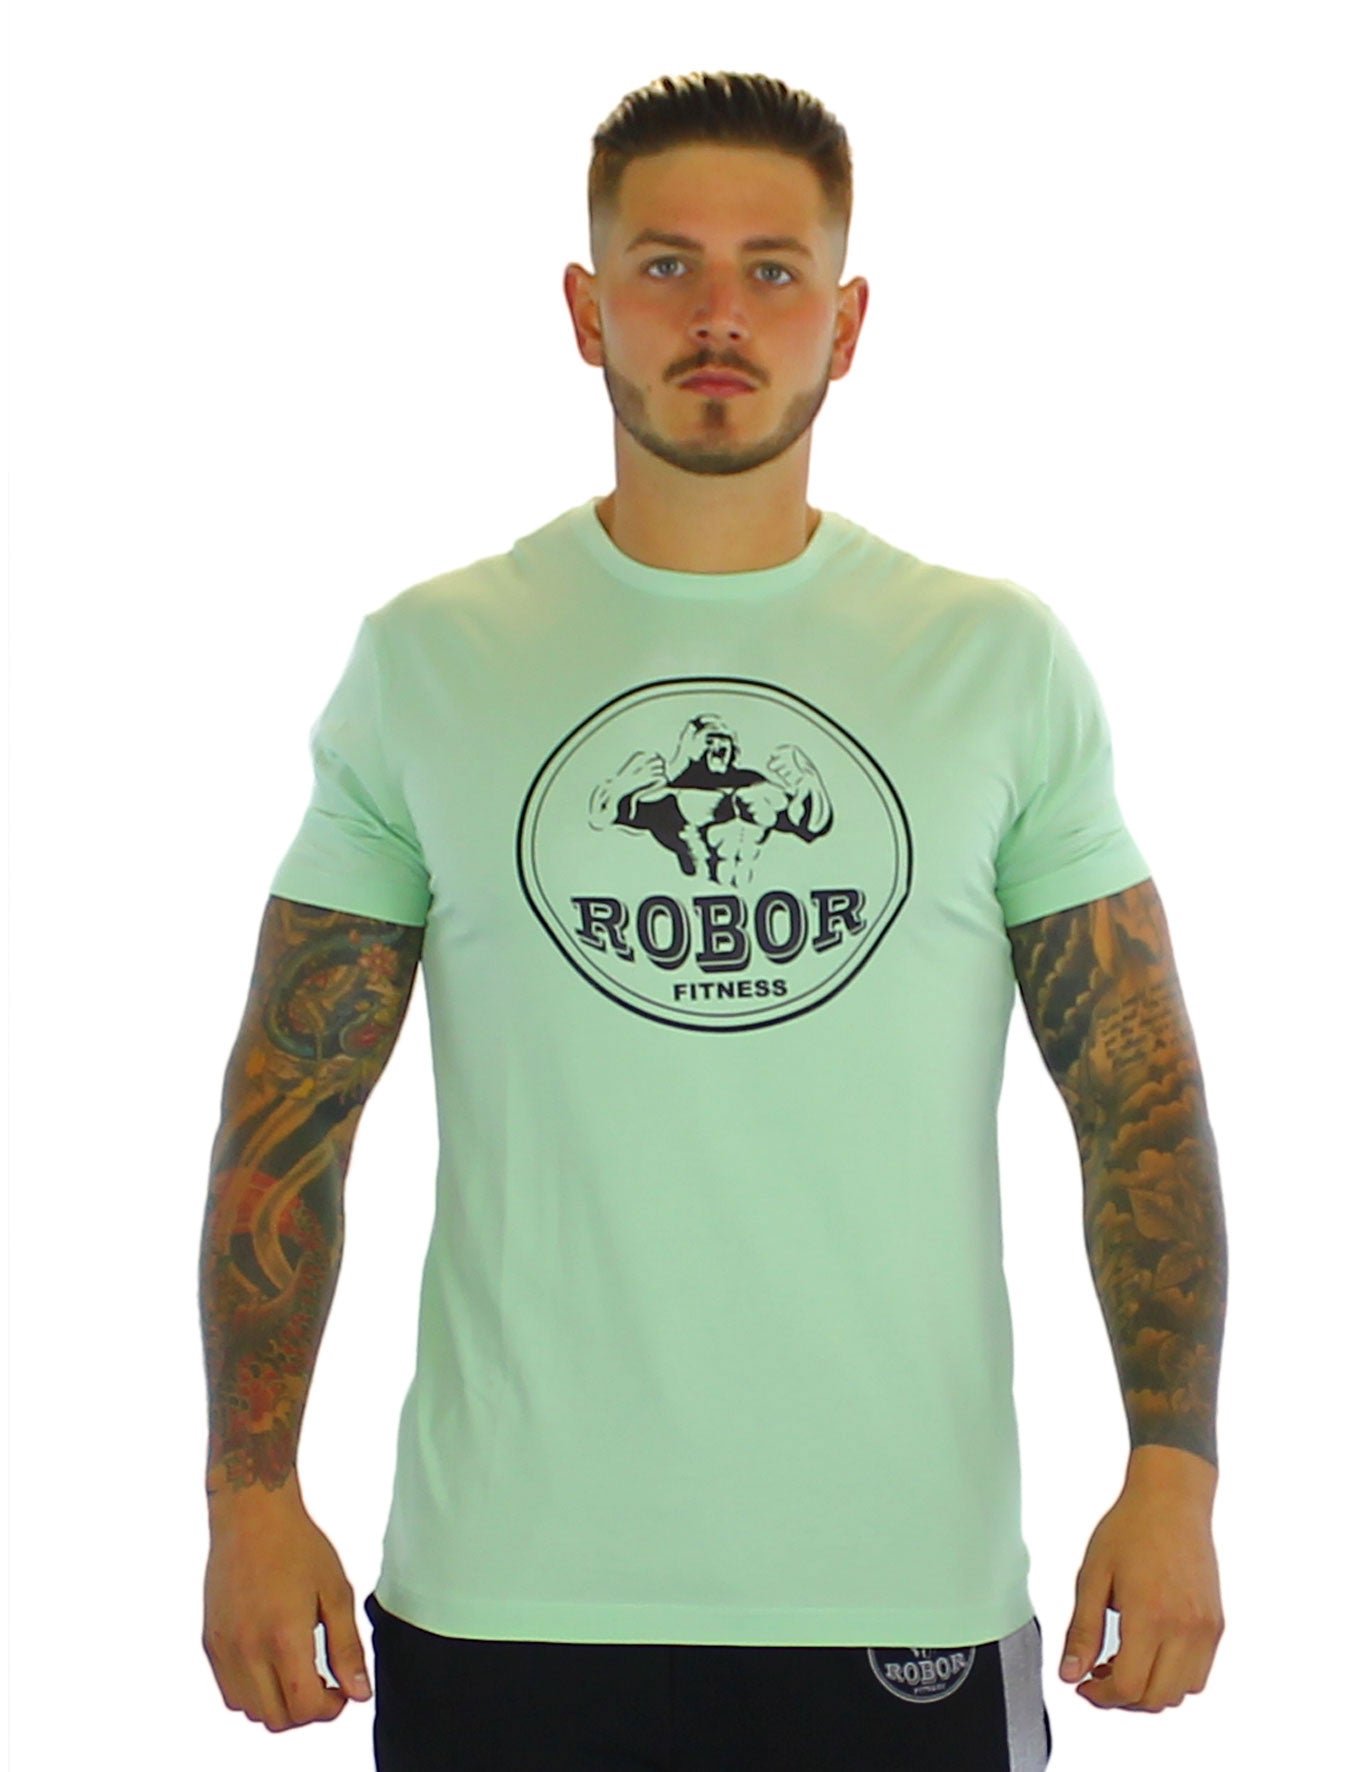 Forsøg Ydmyge marmelade Mens Gym T-Shirt | Muscle Fit T-Shirts | Gym Clothes | Robor Fitness